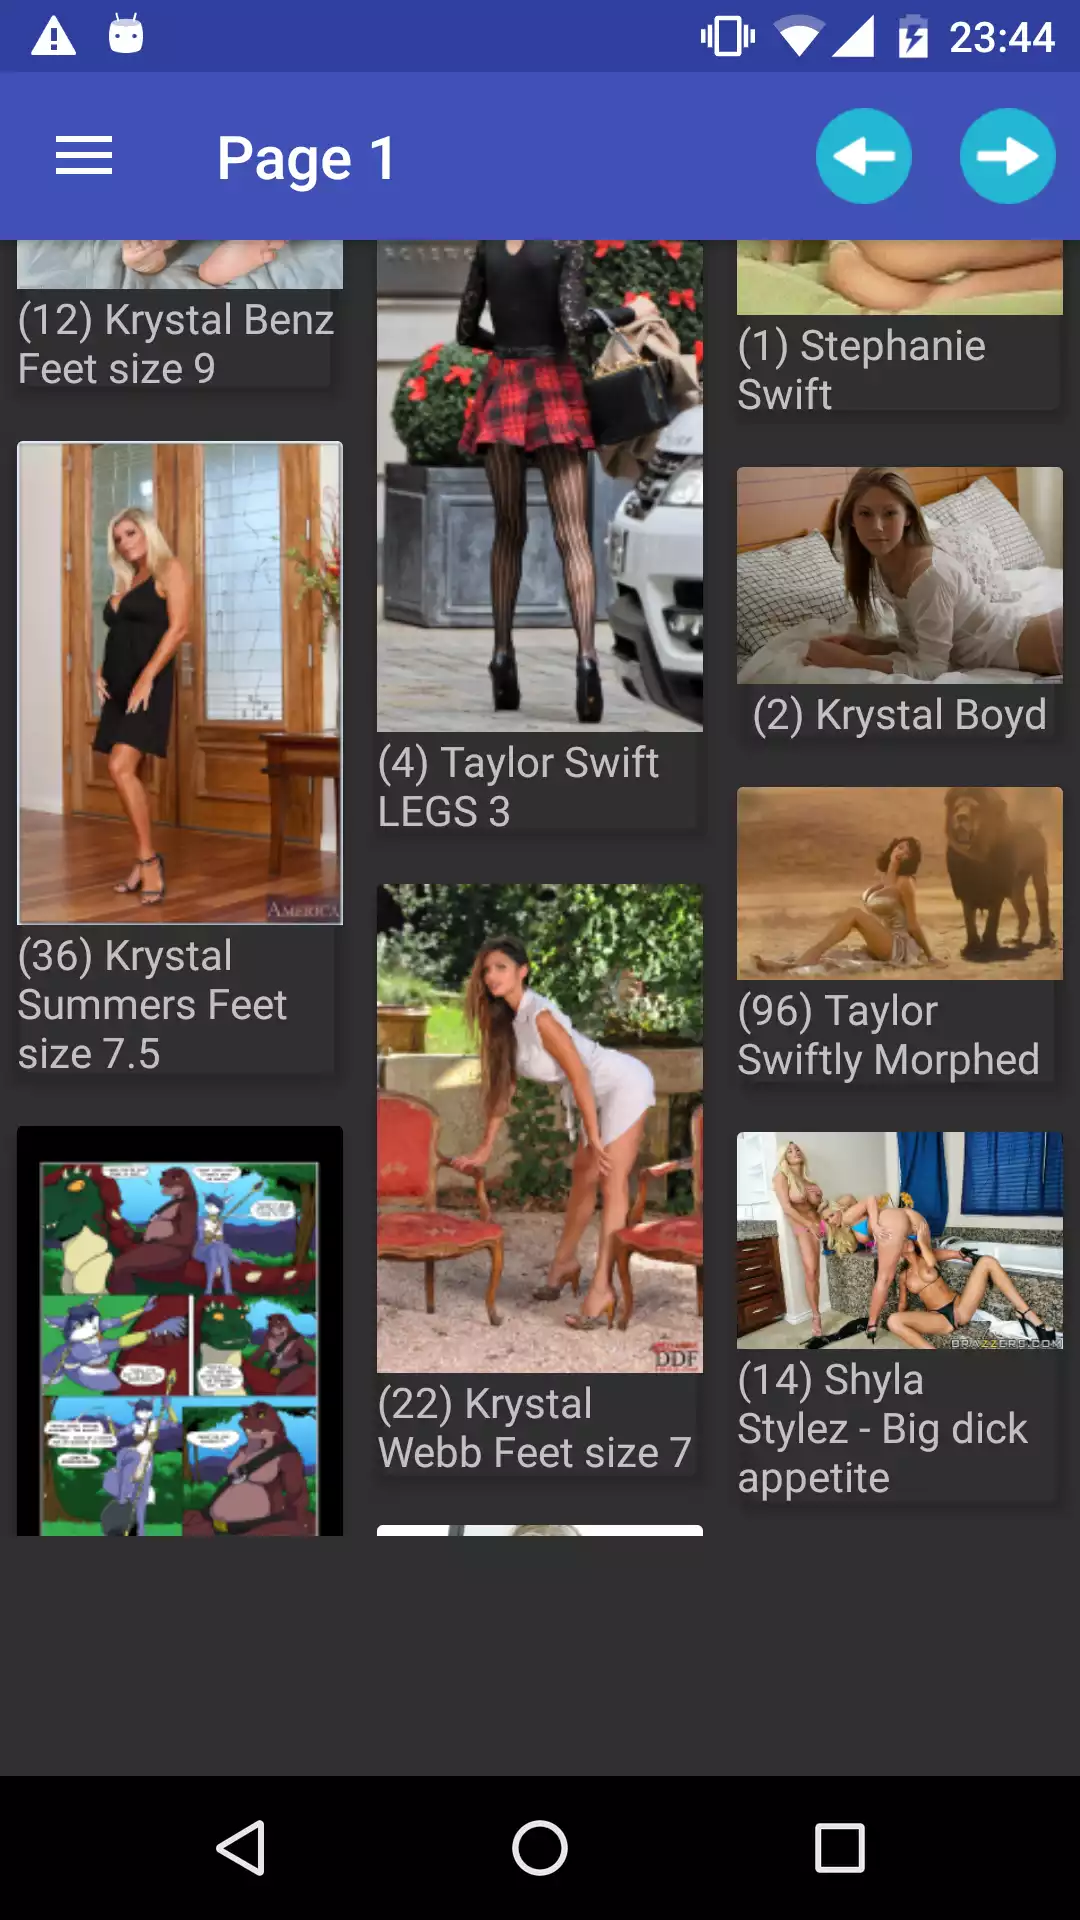 krystal-swift pornstar,puzzles,hetai,hentai,and,wallpaper,panties,galleries,download,android,images,porn,updates,app,manga,apk,apps,erotic,sexy,hebtai,game,backgrounds,wallpapers